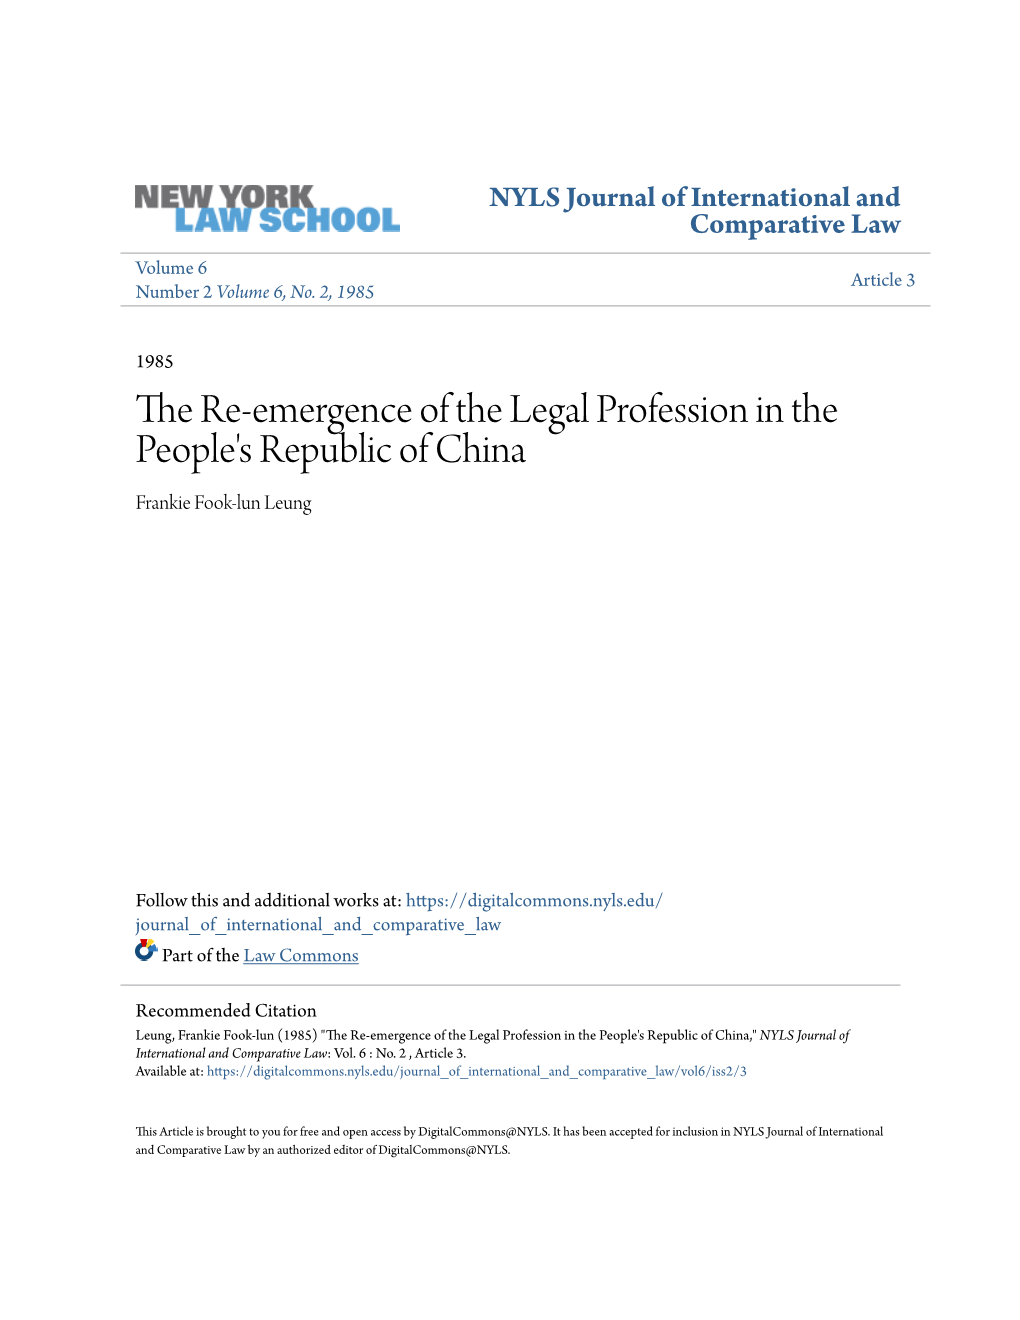 The Re-Emergence of the Legal Profession in the People's Republic of China Frankie Fook-Lun Leung